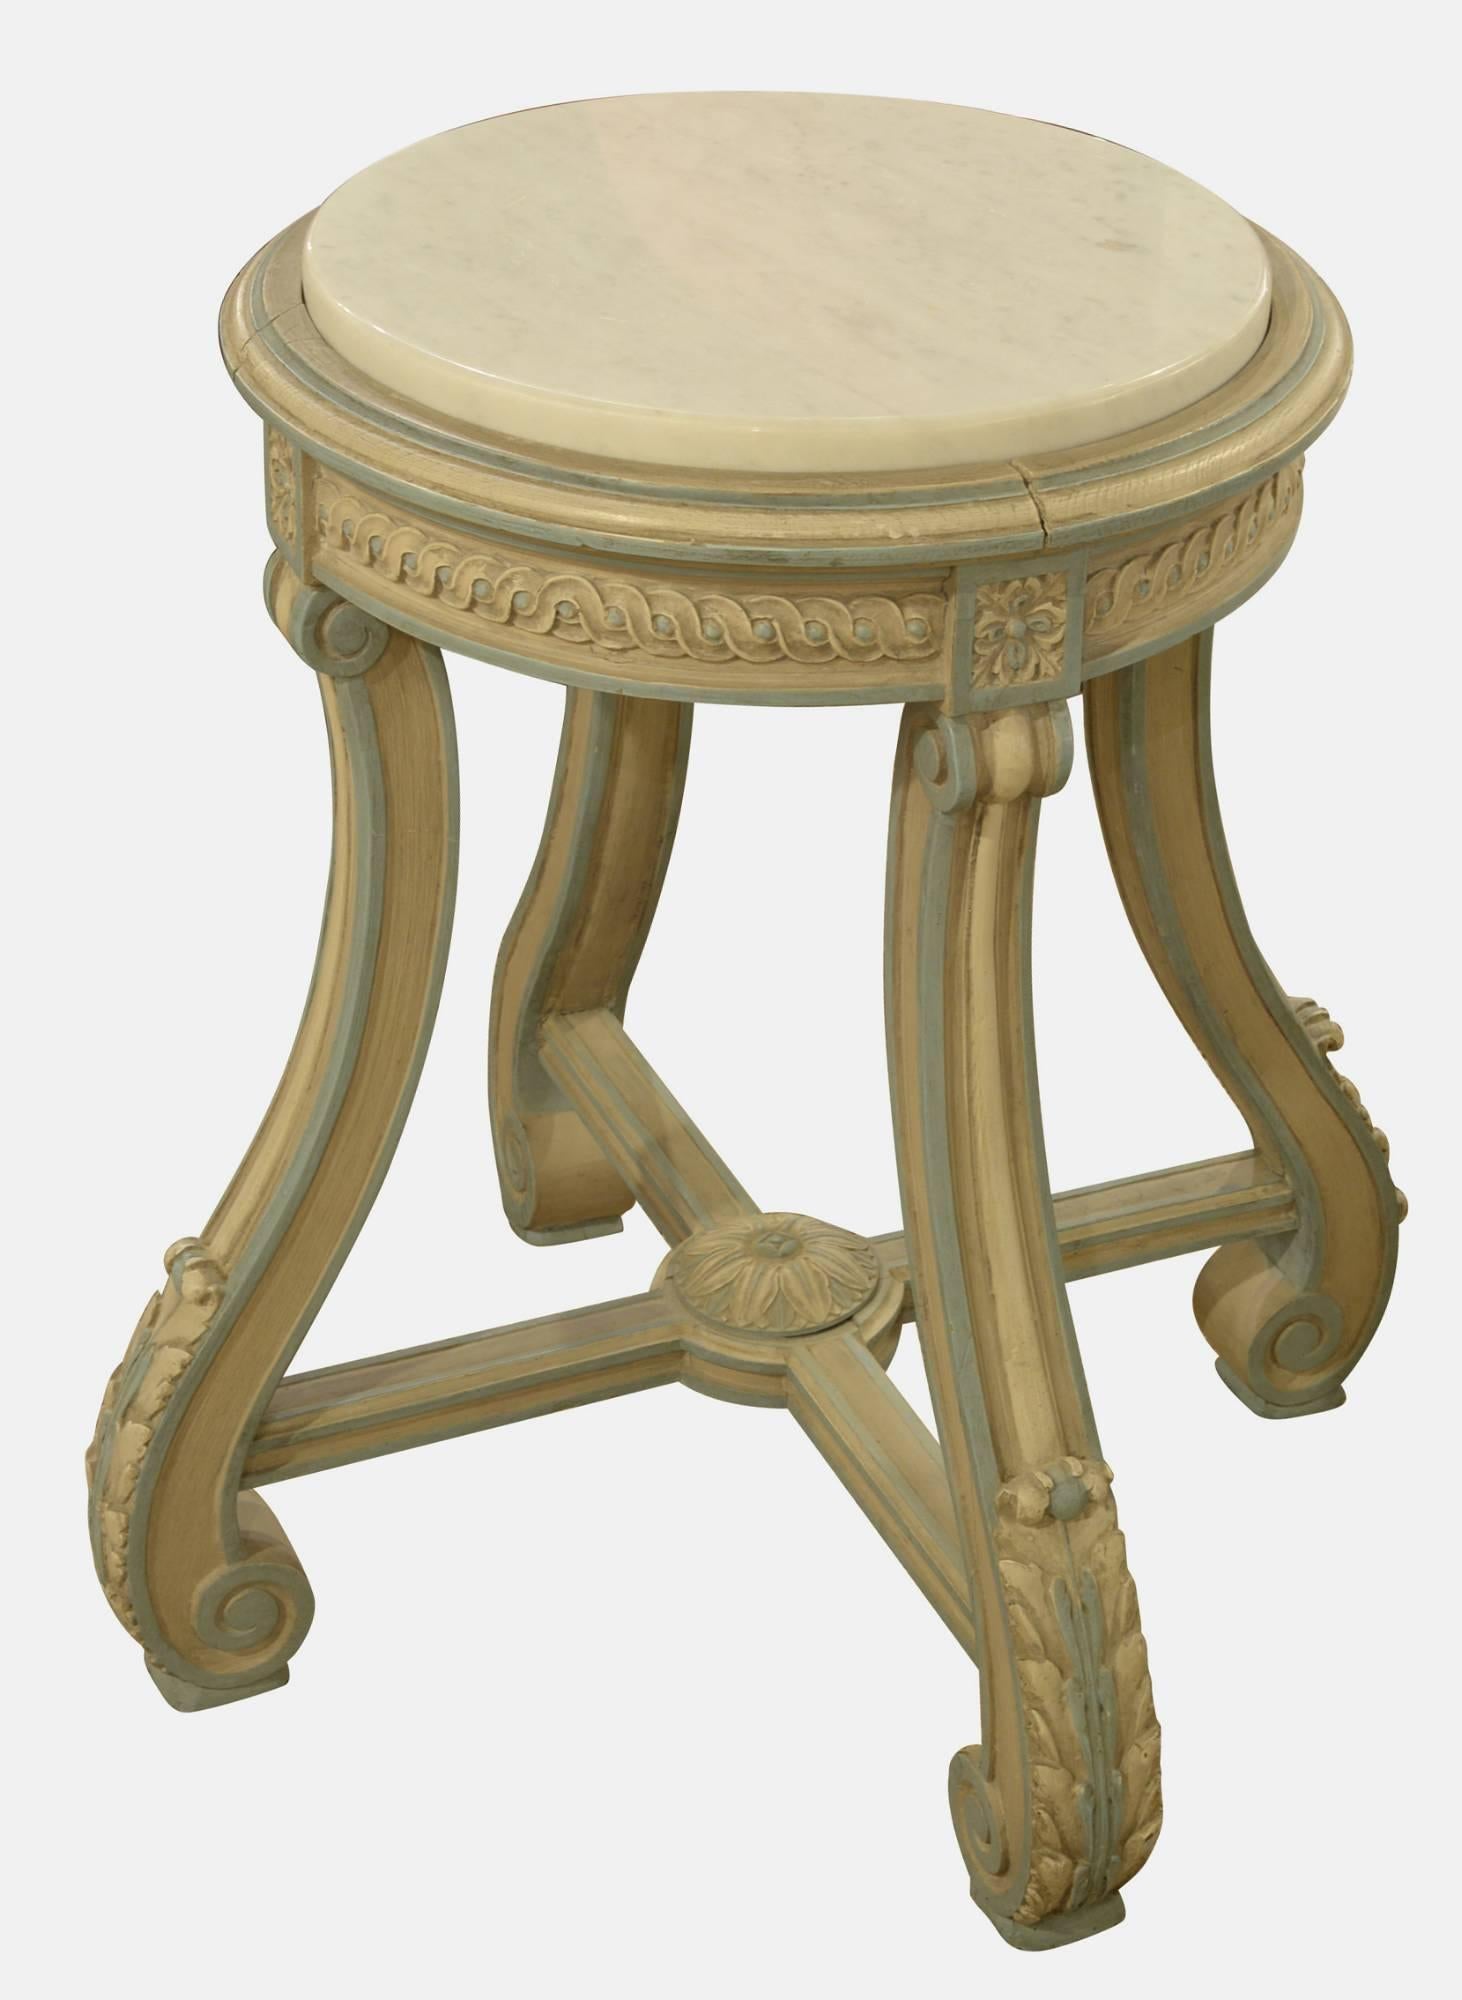 Pair of late 19th century continental urn stands with later paint.